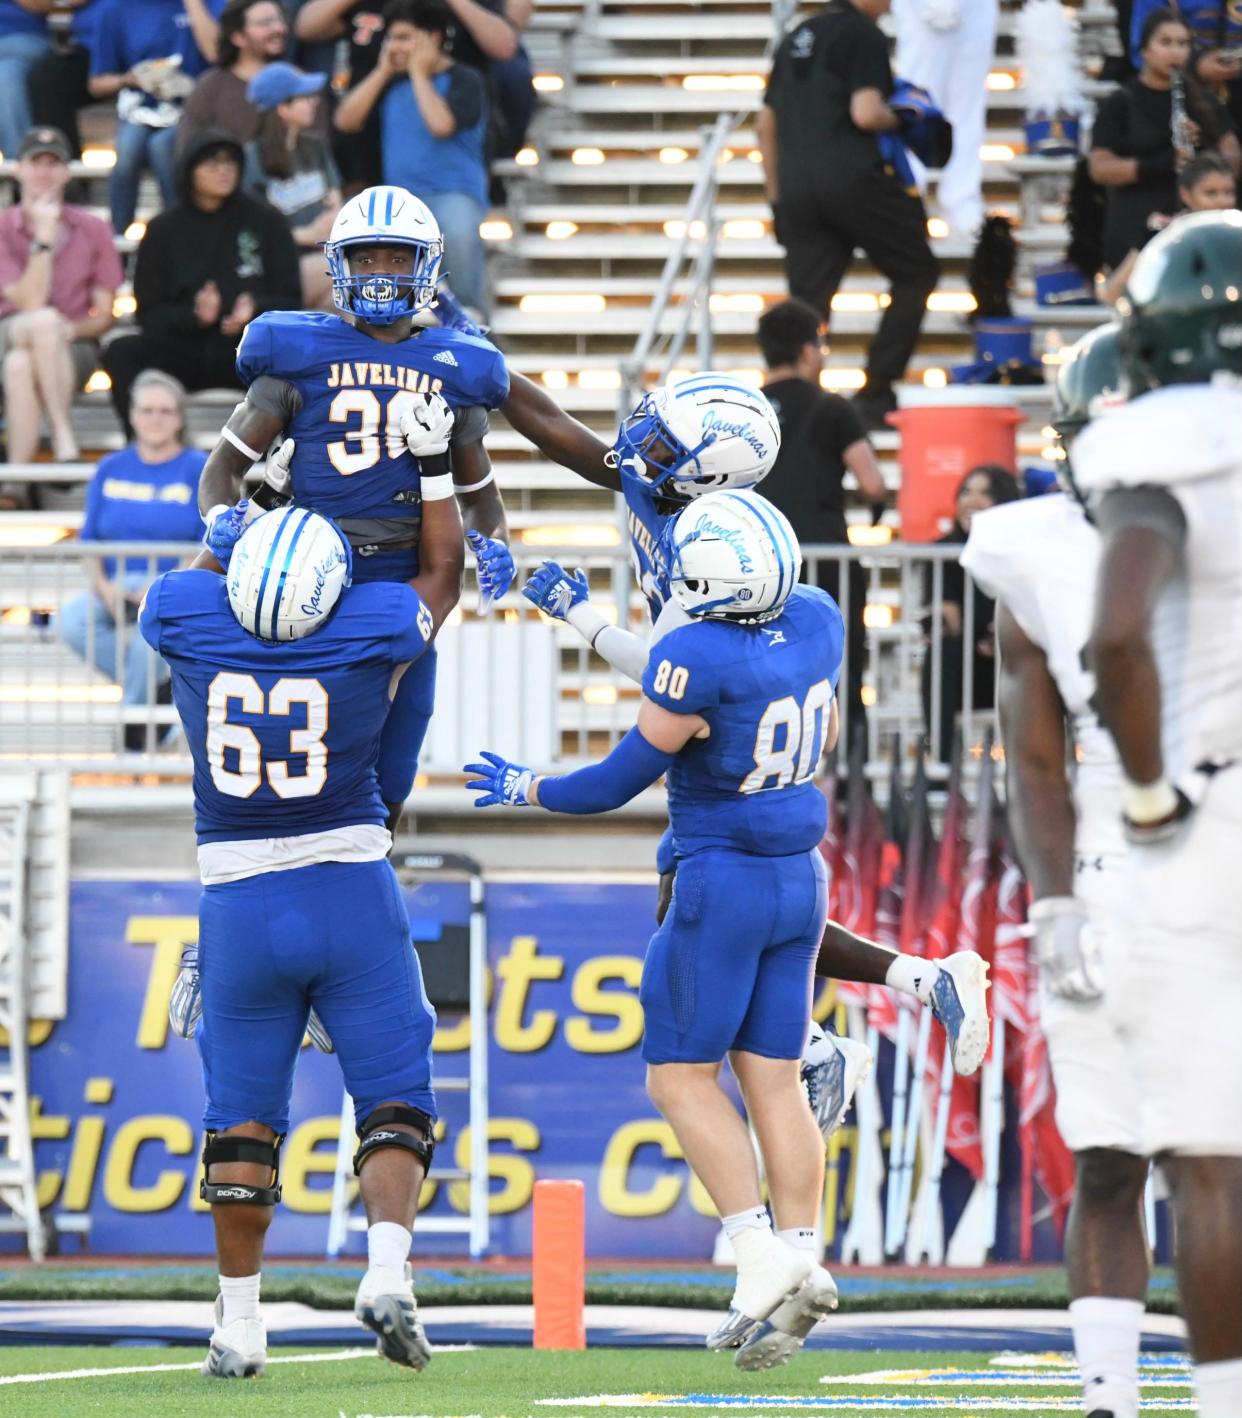 Texas A&M-Kingsville running back Toneil Carter celebrates with Juan Quezada after scoring a touchdown against Eastern New Mexico at Javelina Stadium in Kingsville, Texas on Saturday, Sept. 24, 2022.